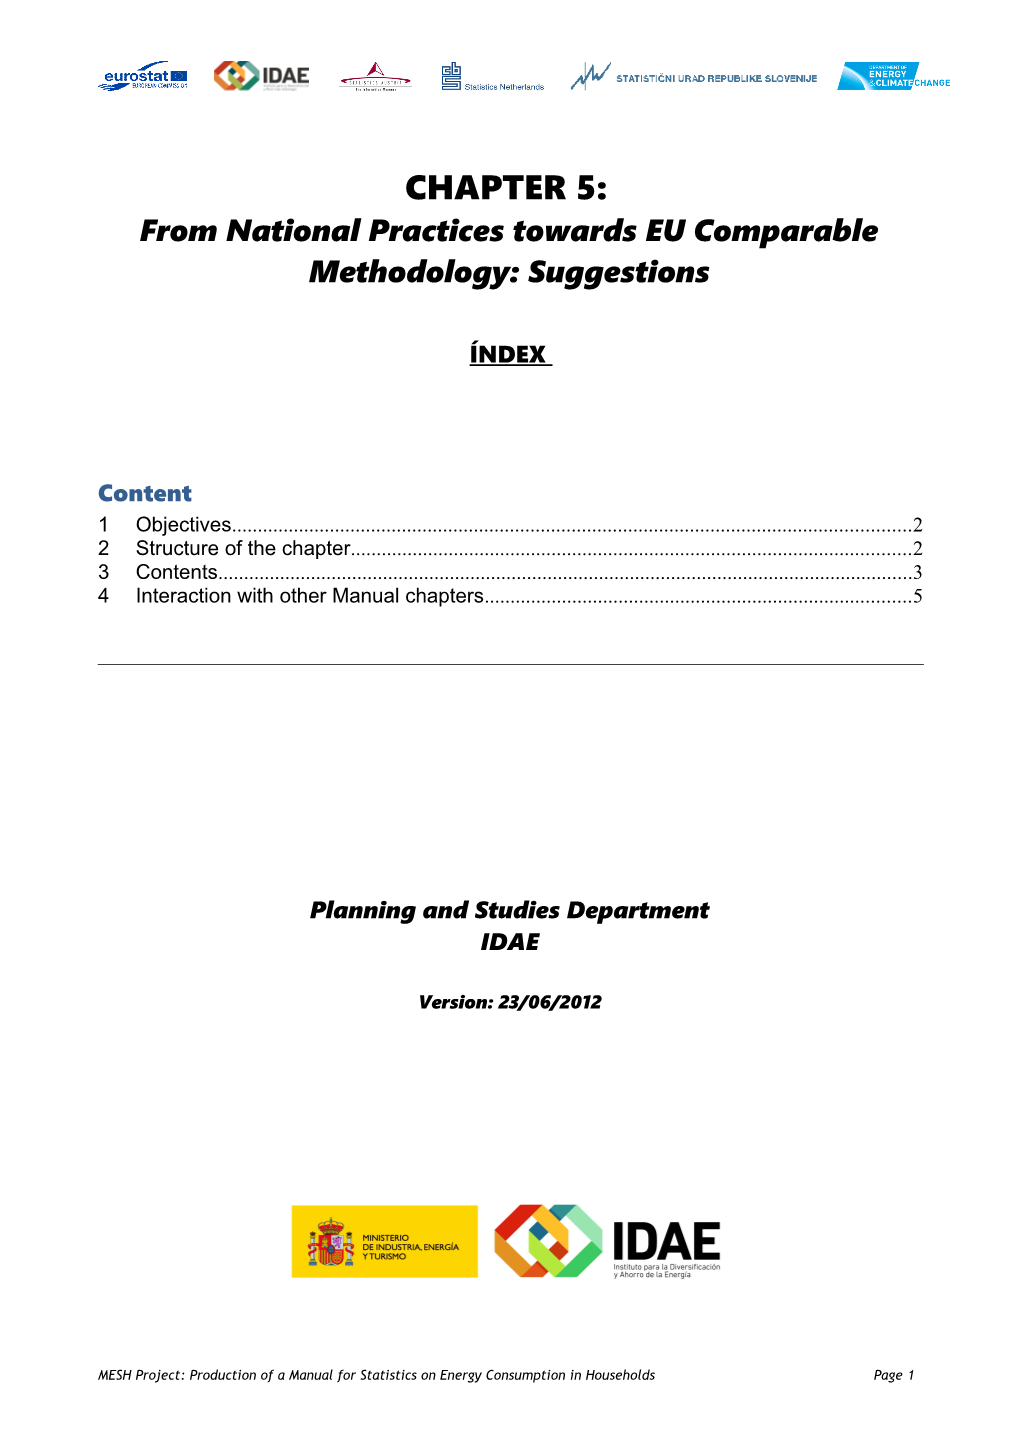 From National Practices Towards EU Comparable Methodology: Suggestions